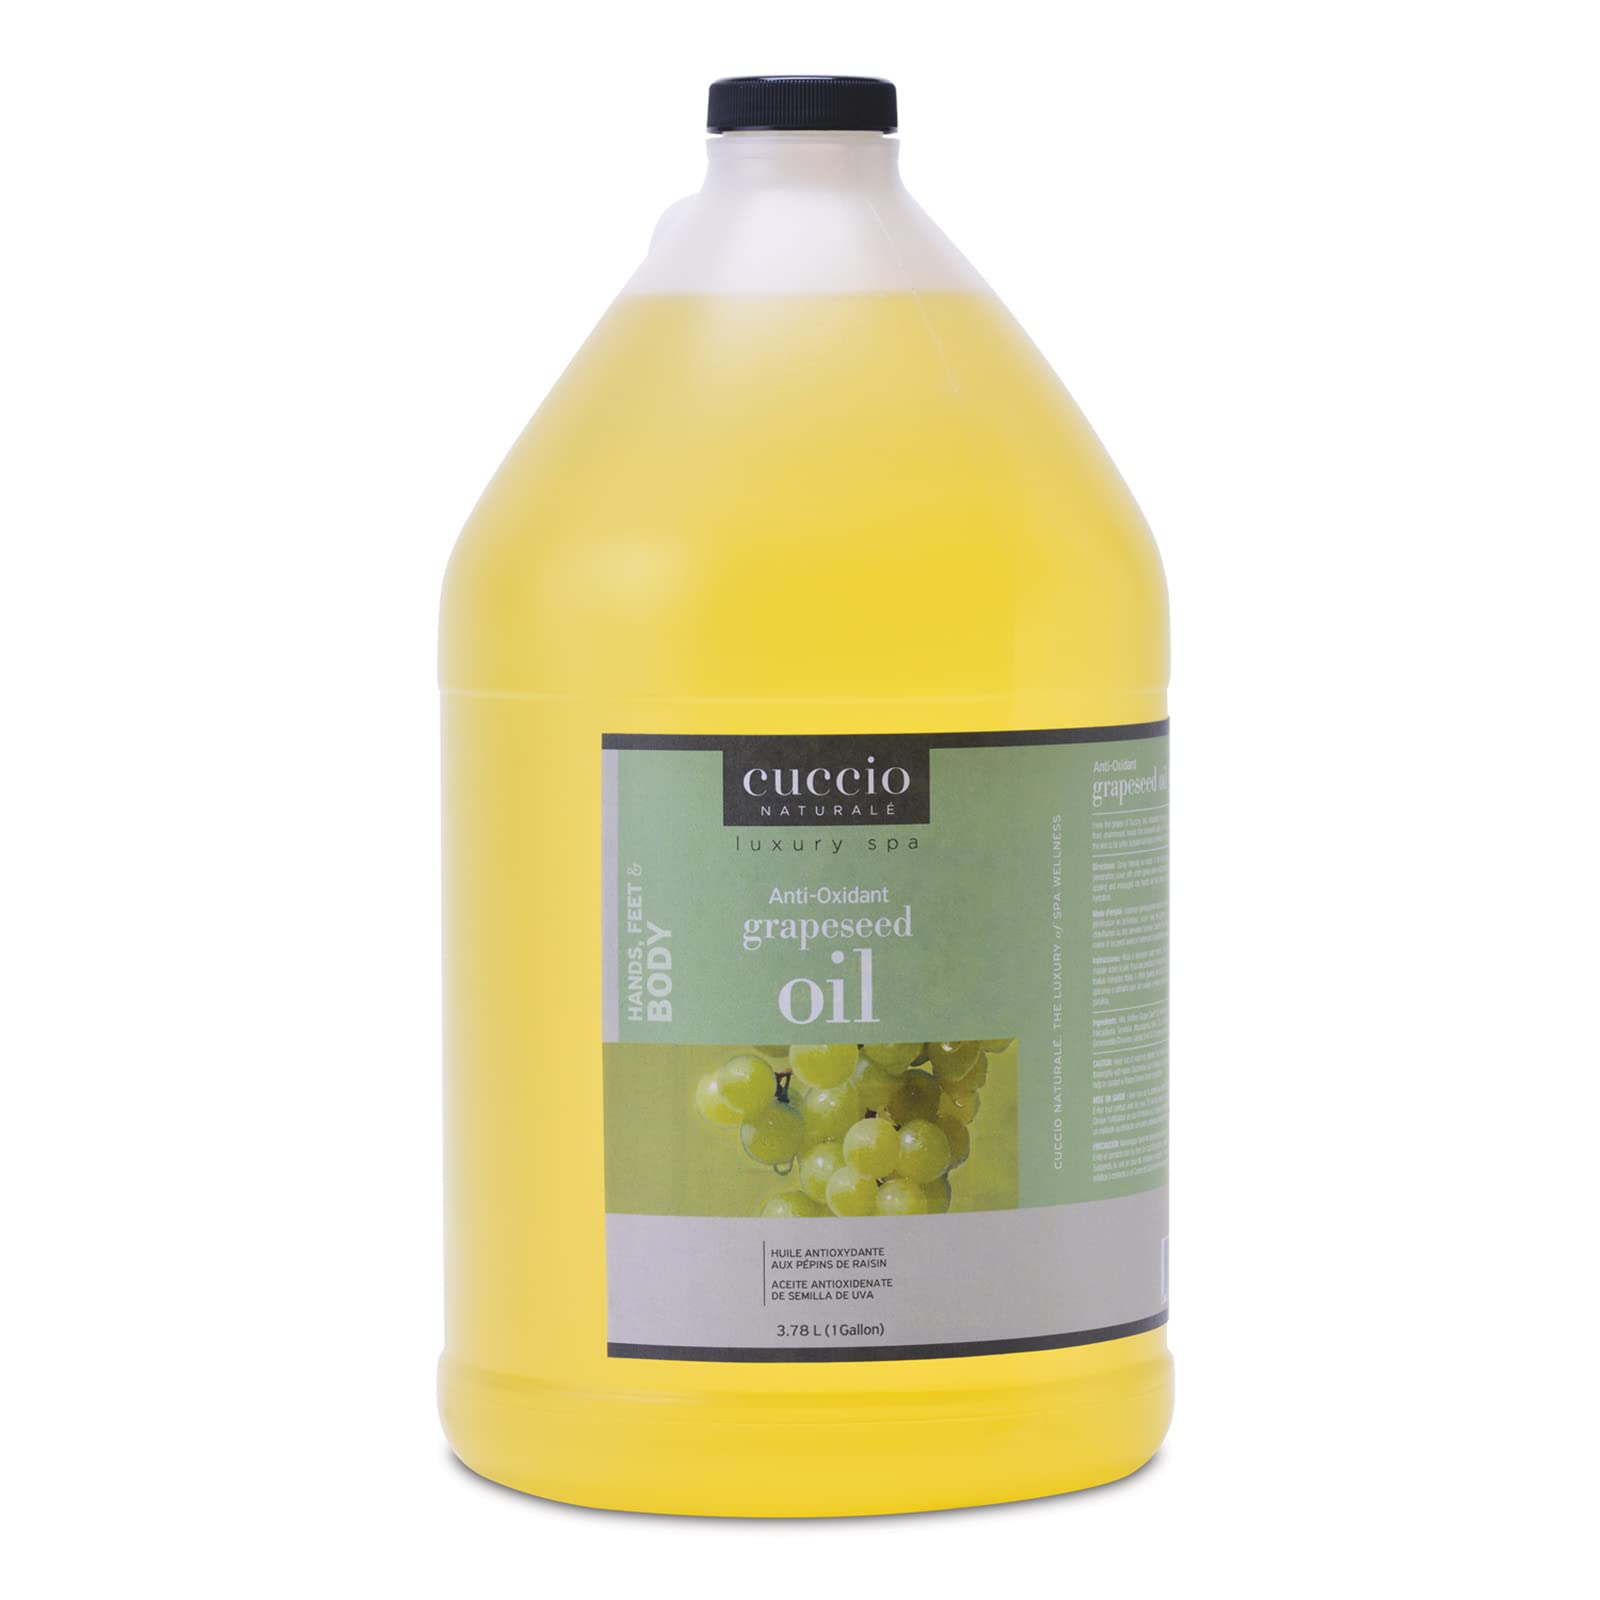 Cuccio Naturale Anti-Oxidant Oil - Smoothing Moisture Repair For Dry, Cracked Skin Relief - Firming Oil to Reduce Fine Lines and Signs of Aging - Massage Treatment for Hands, Feet, and Body - 1 gal